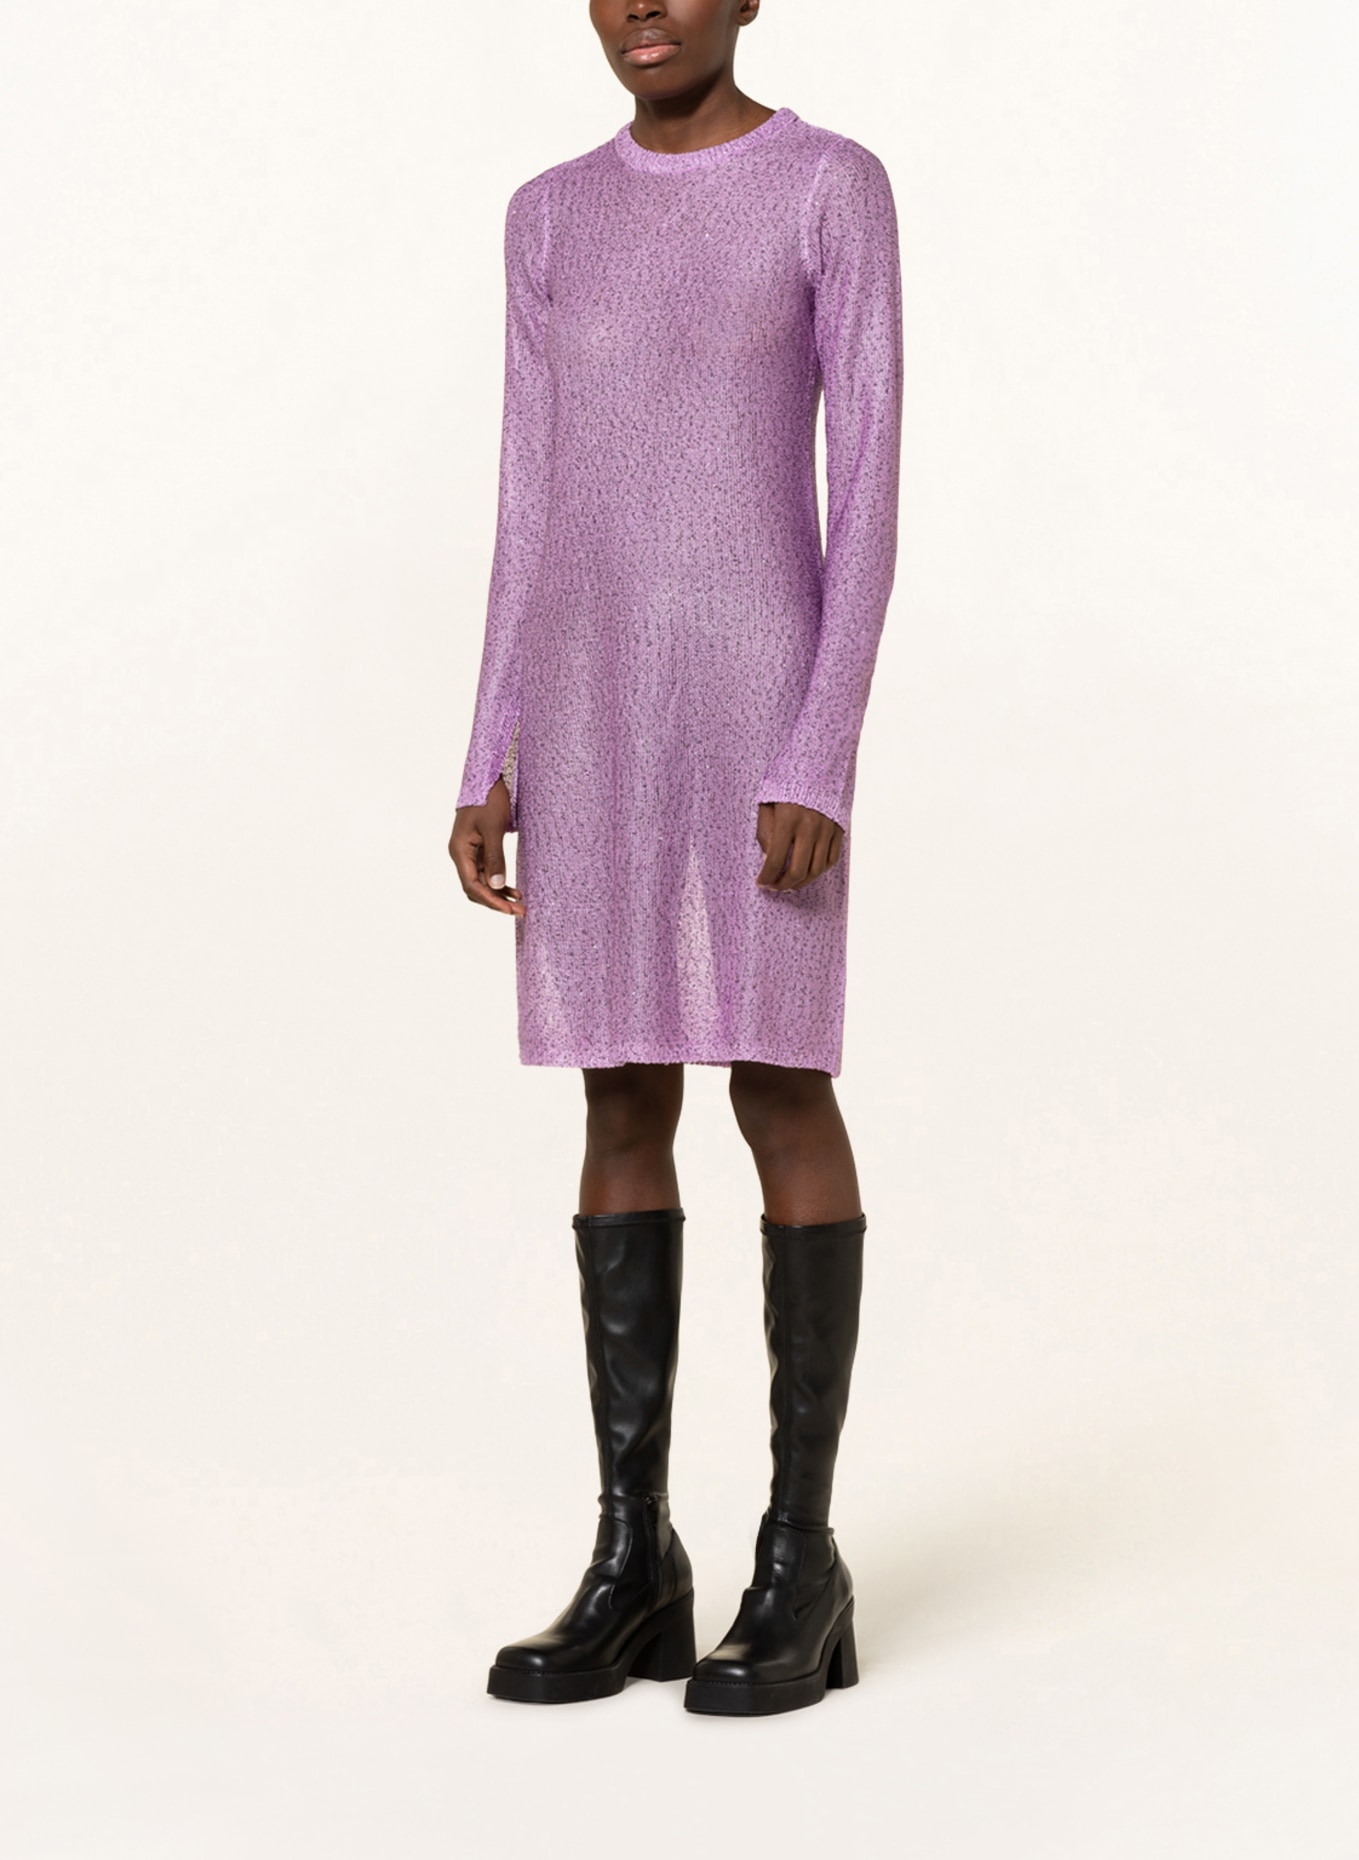 REMAIN Knit dress with sequins, Color: LIGHT PURPLE/ DARK GRAY (Image 2)